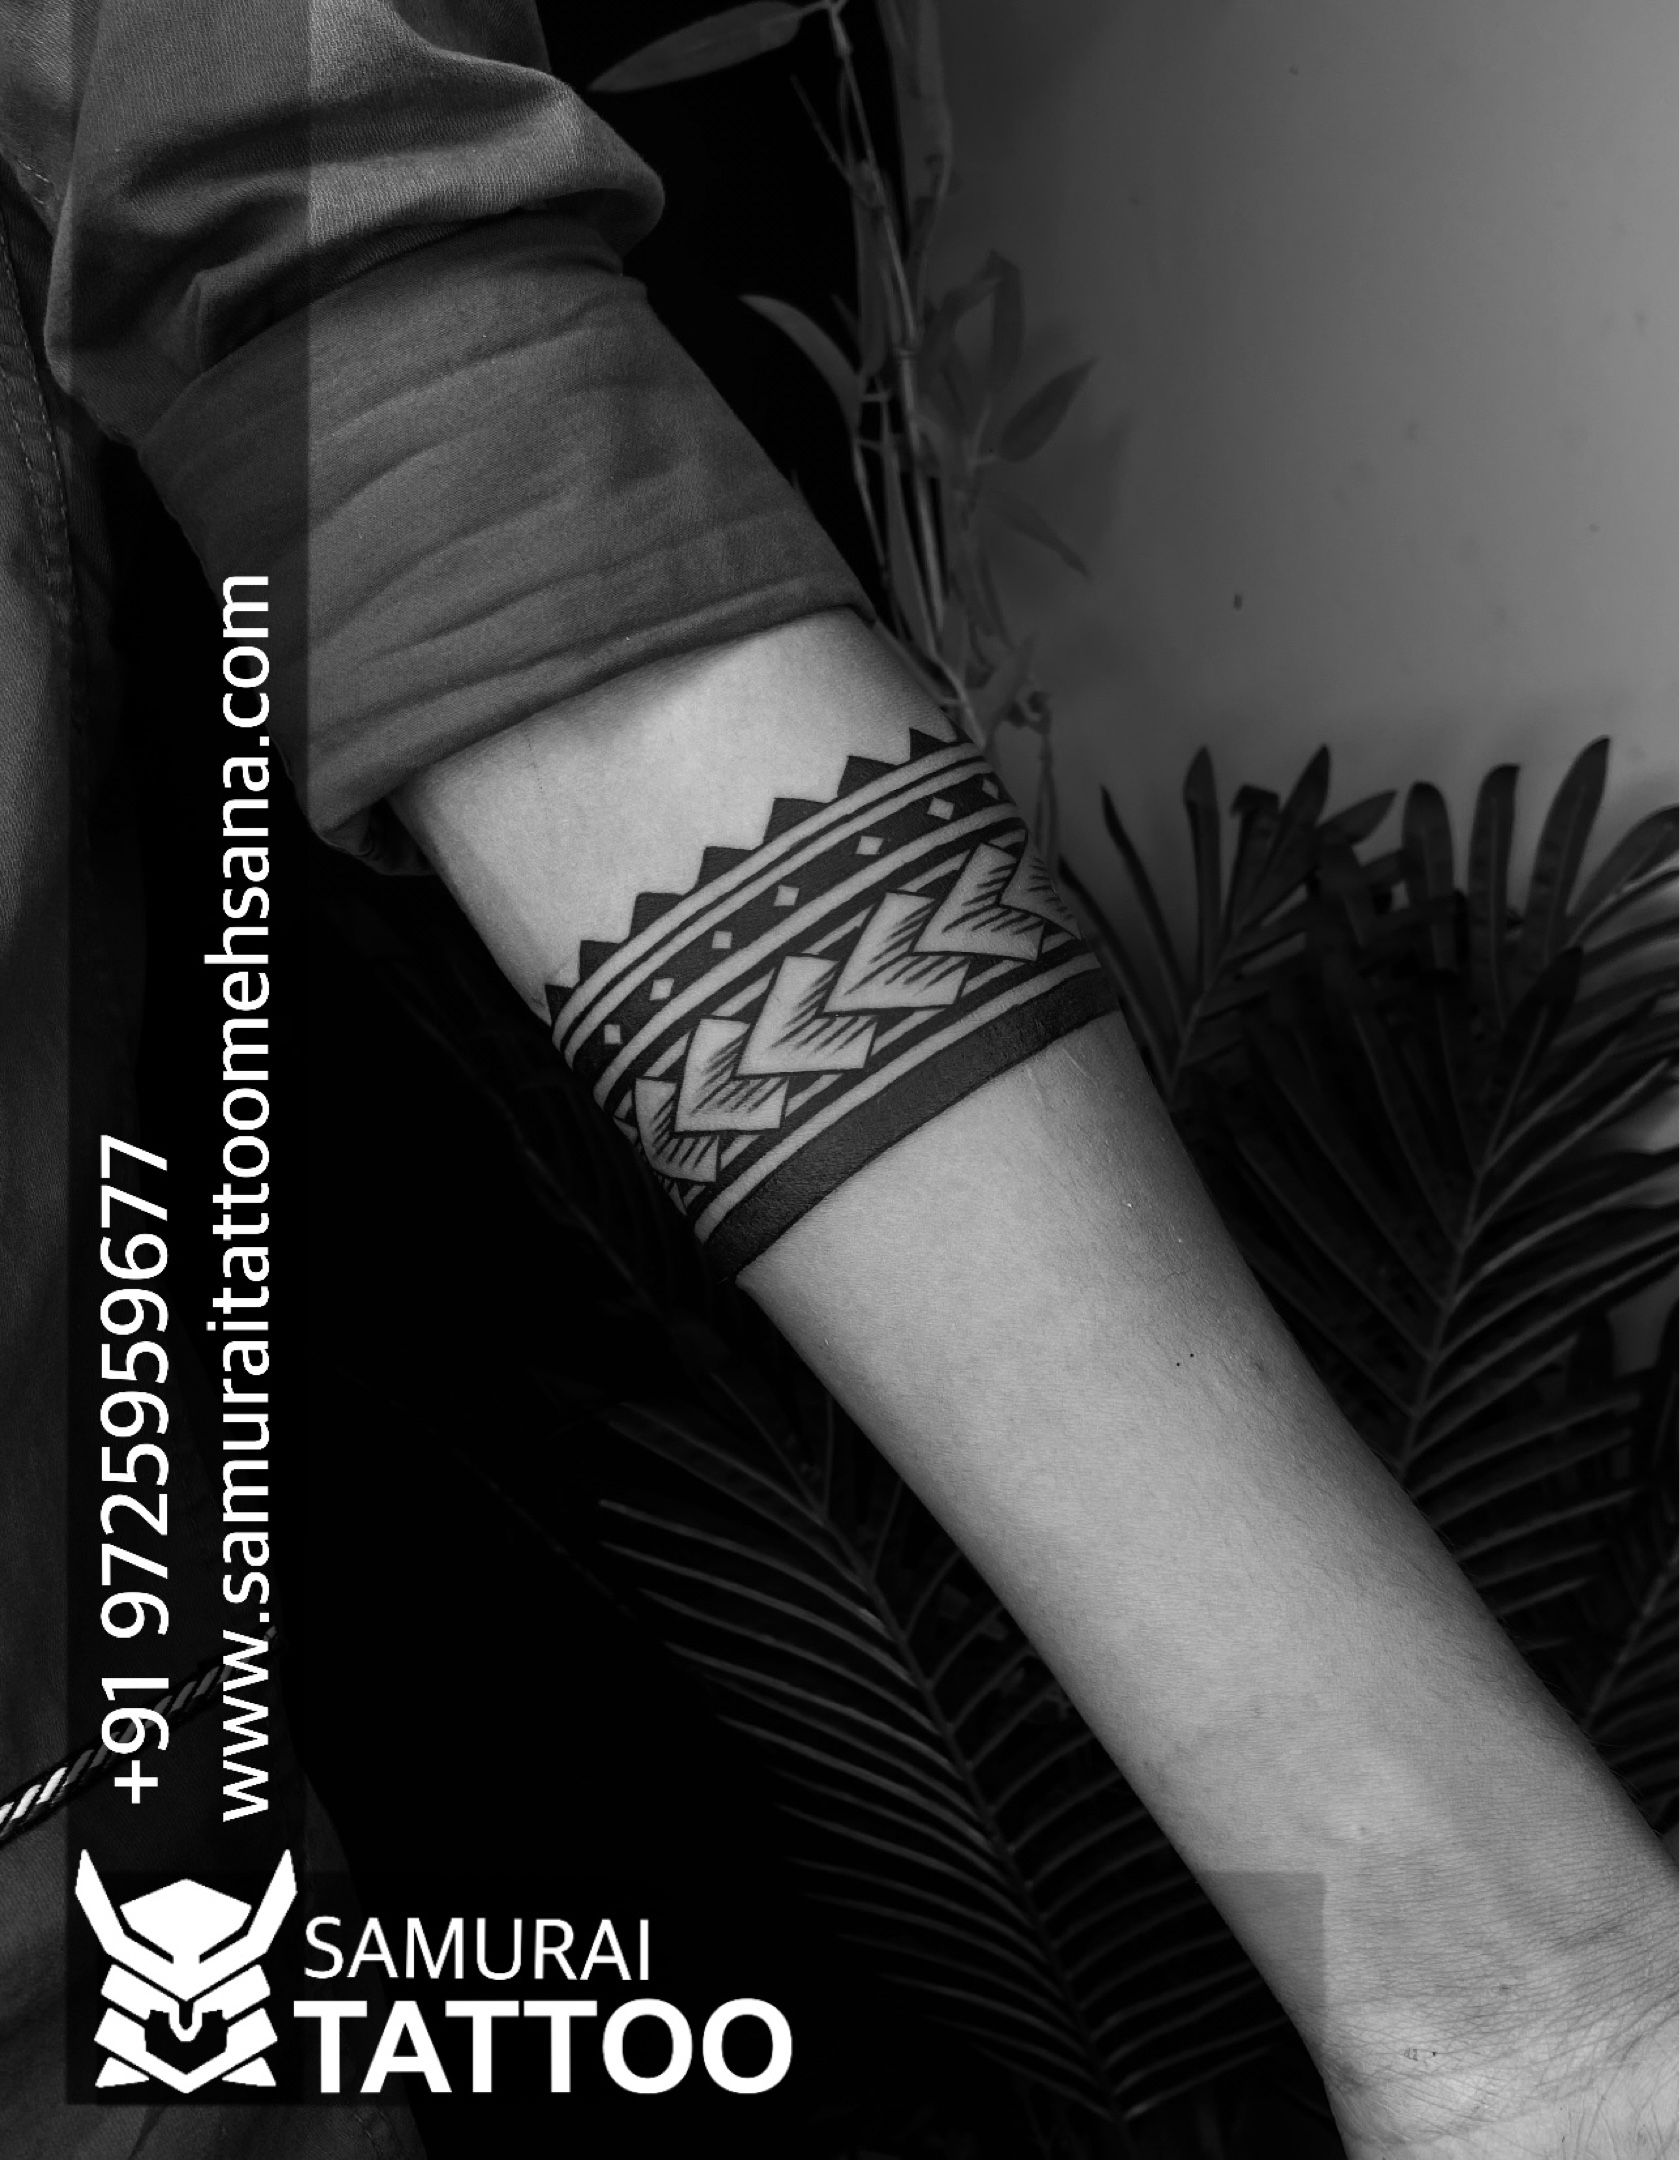 Ket Tattoos  Arm Band Tattoo New Collection Call For Best  Facebook